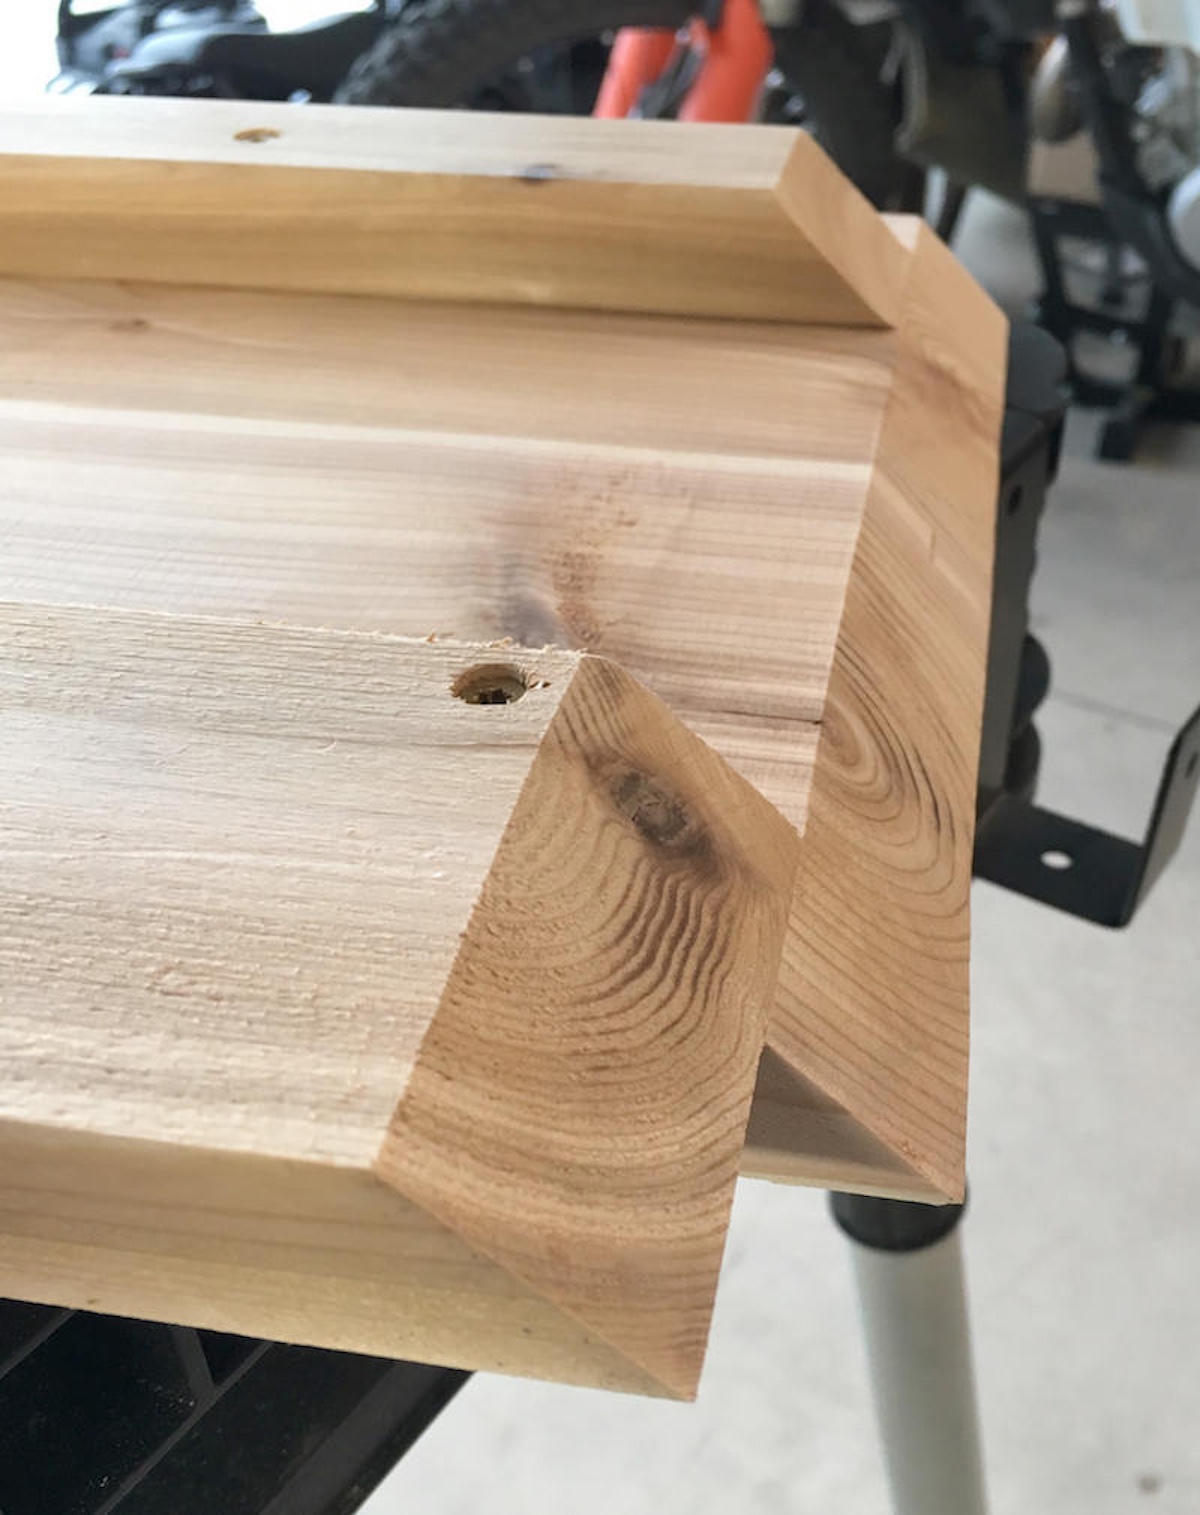 Cut 45 degree edges on both sides of the table frame with a saw